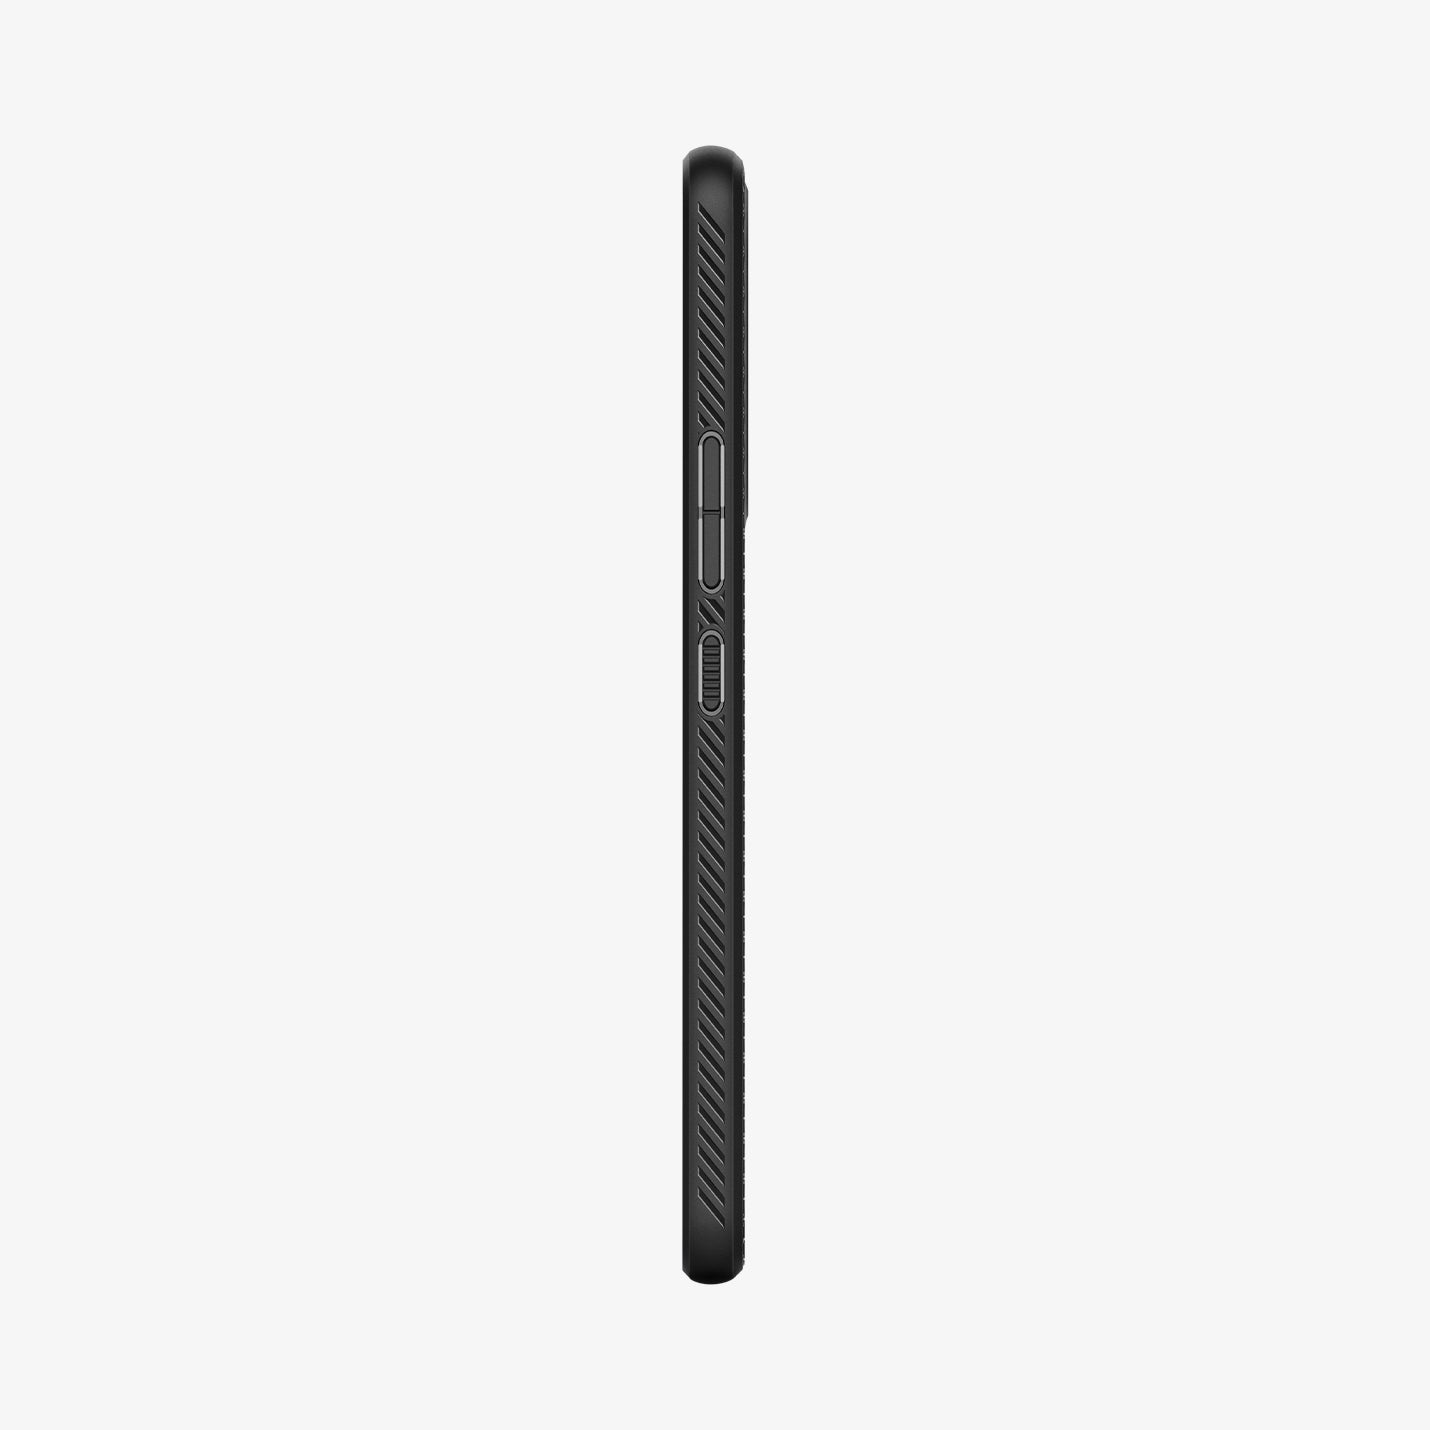 ACS04258 - Galaxy A53 5G Case Liquid Air in Matte Black showing the side with side buttons